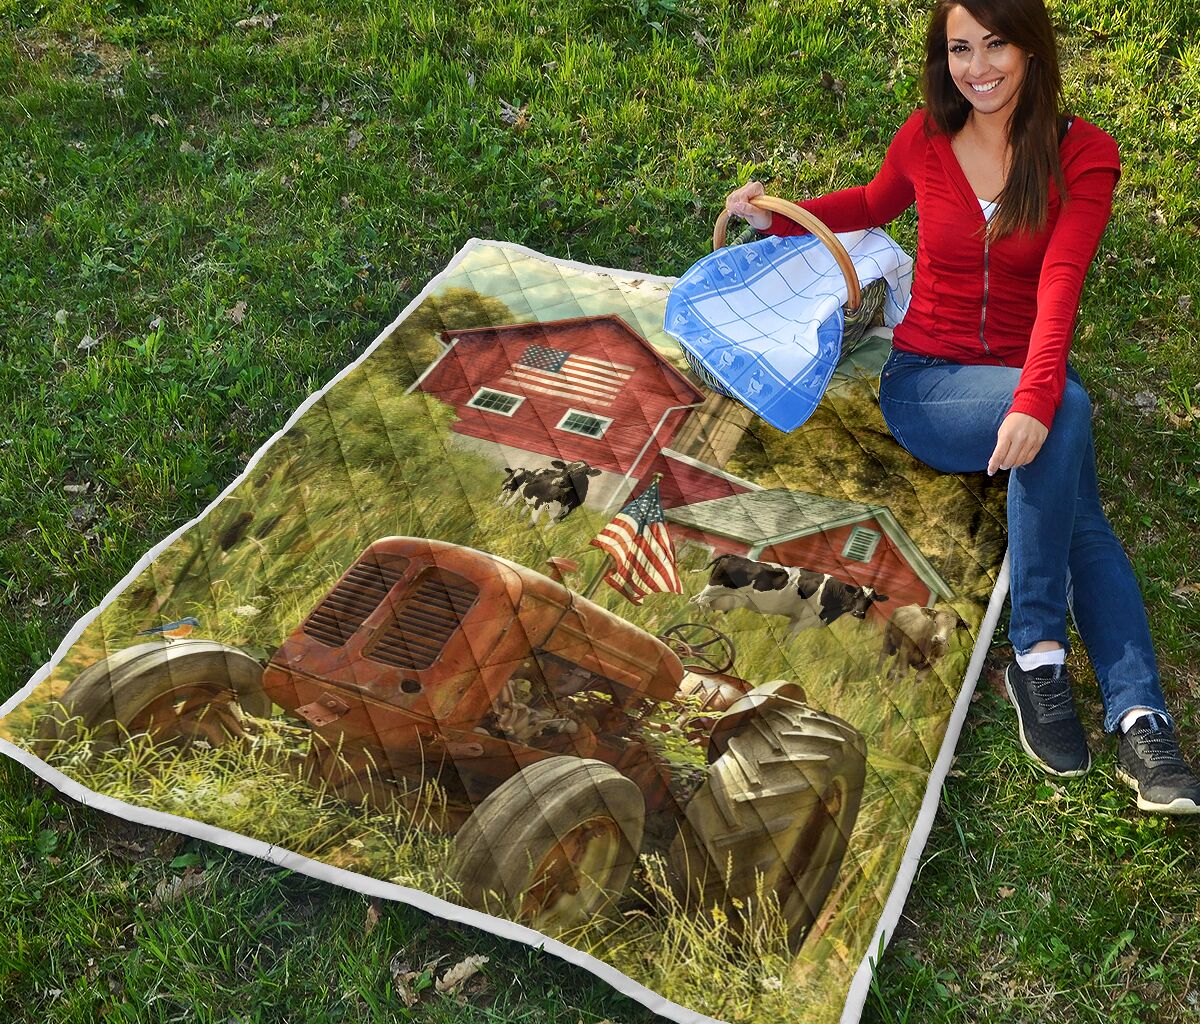 America farmer country life quilt 4